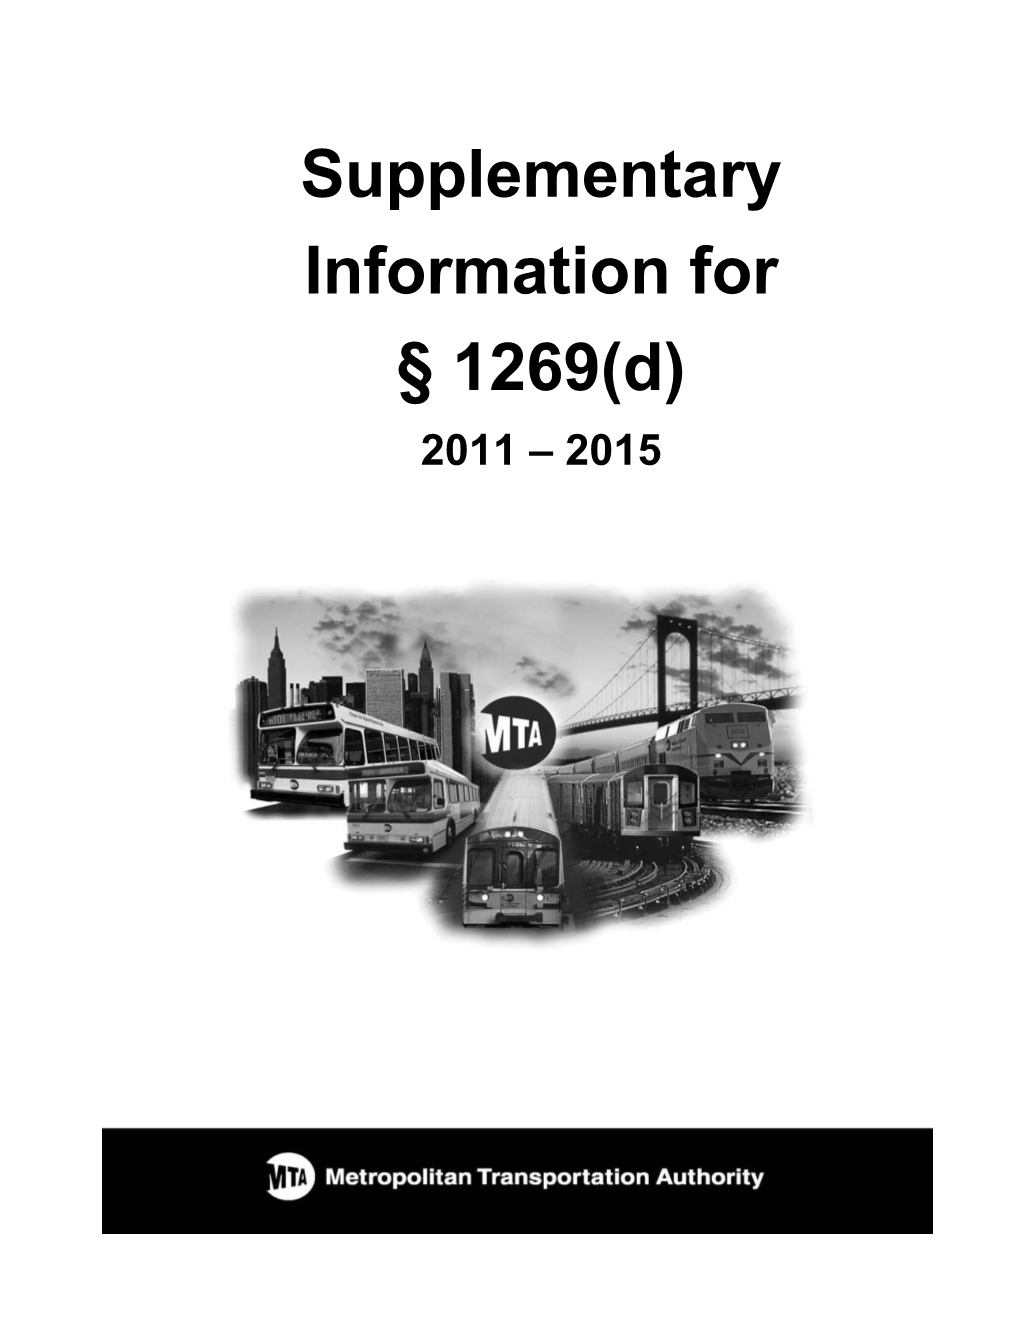 Supplementary Information for § 1269(D) 2011 – 2015